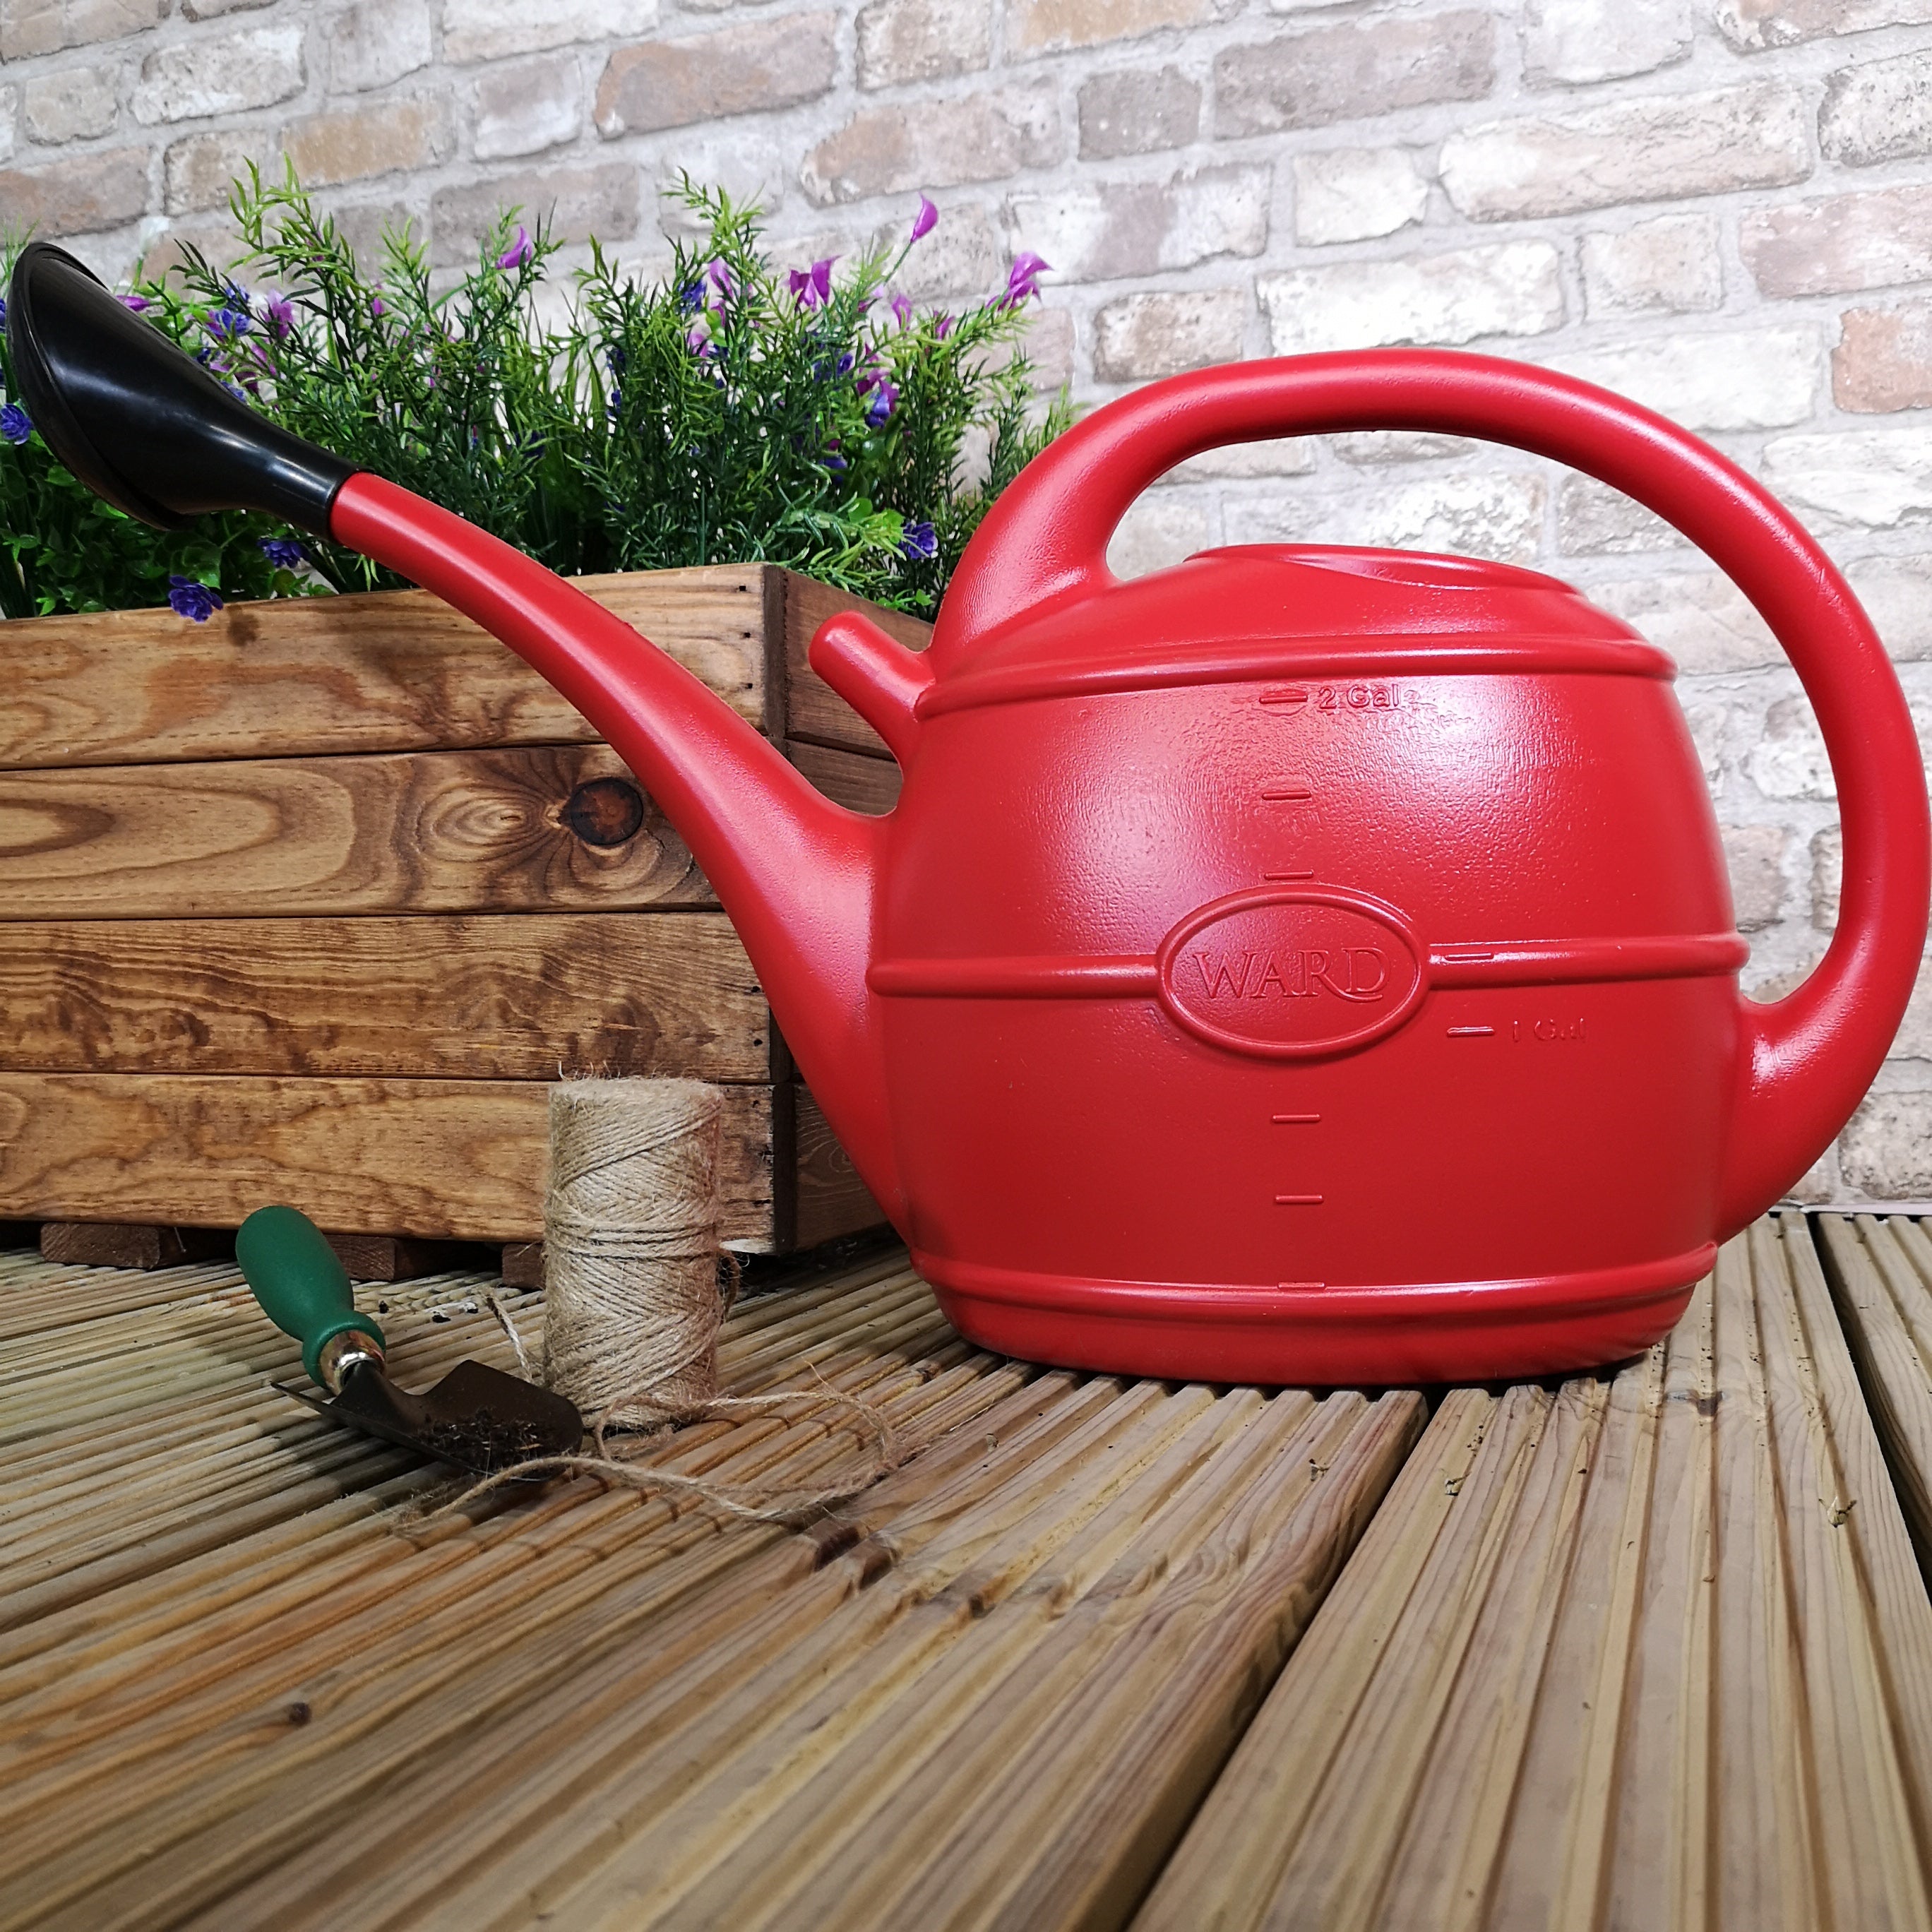 10L Ward Garden Watering Can with Rose - Red